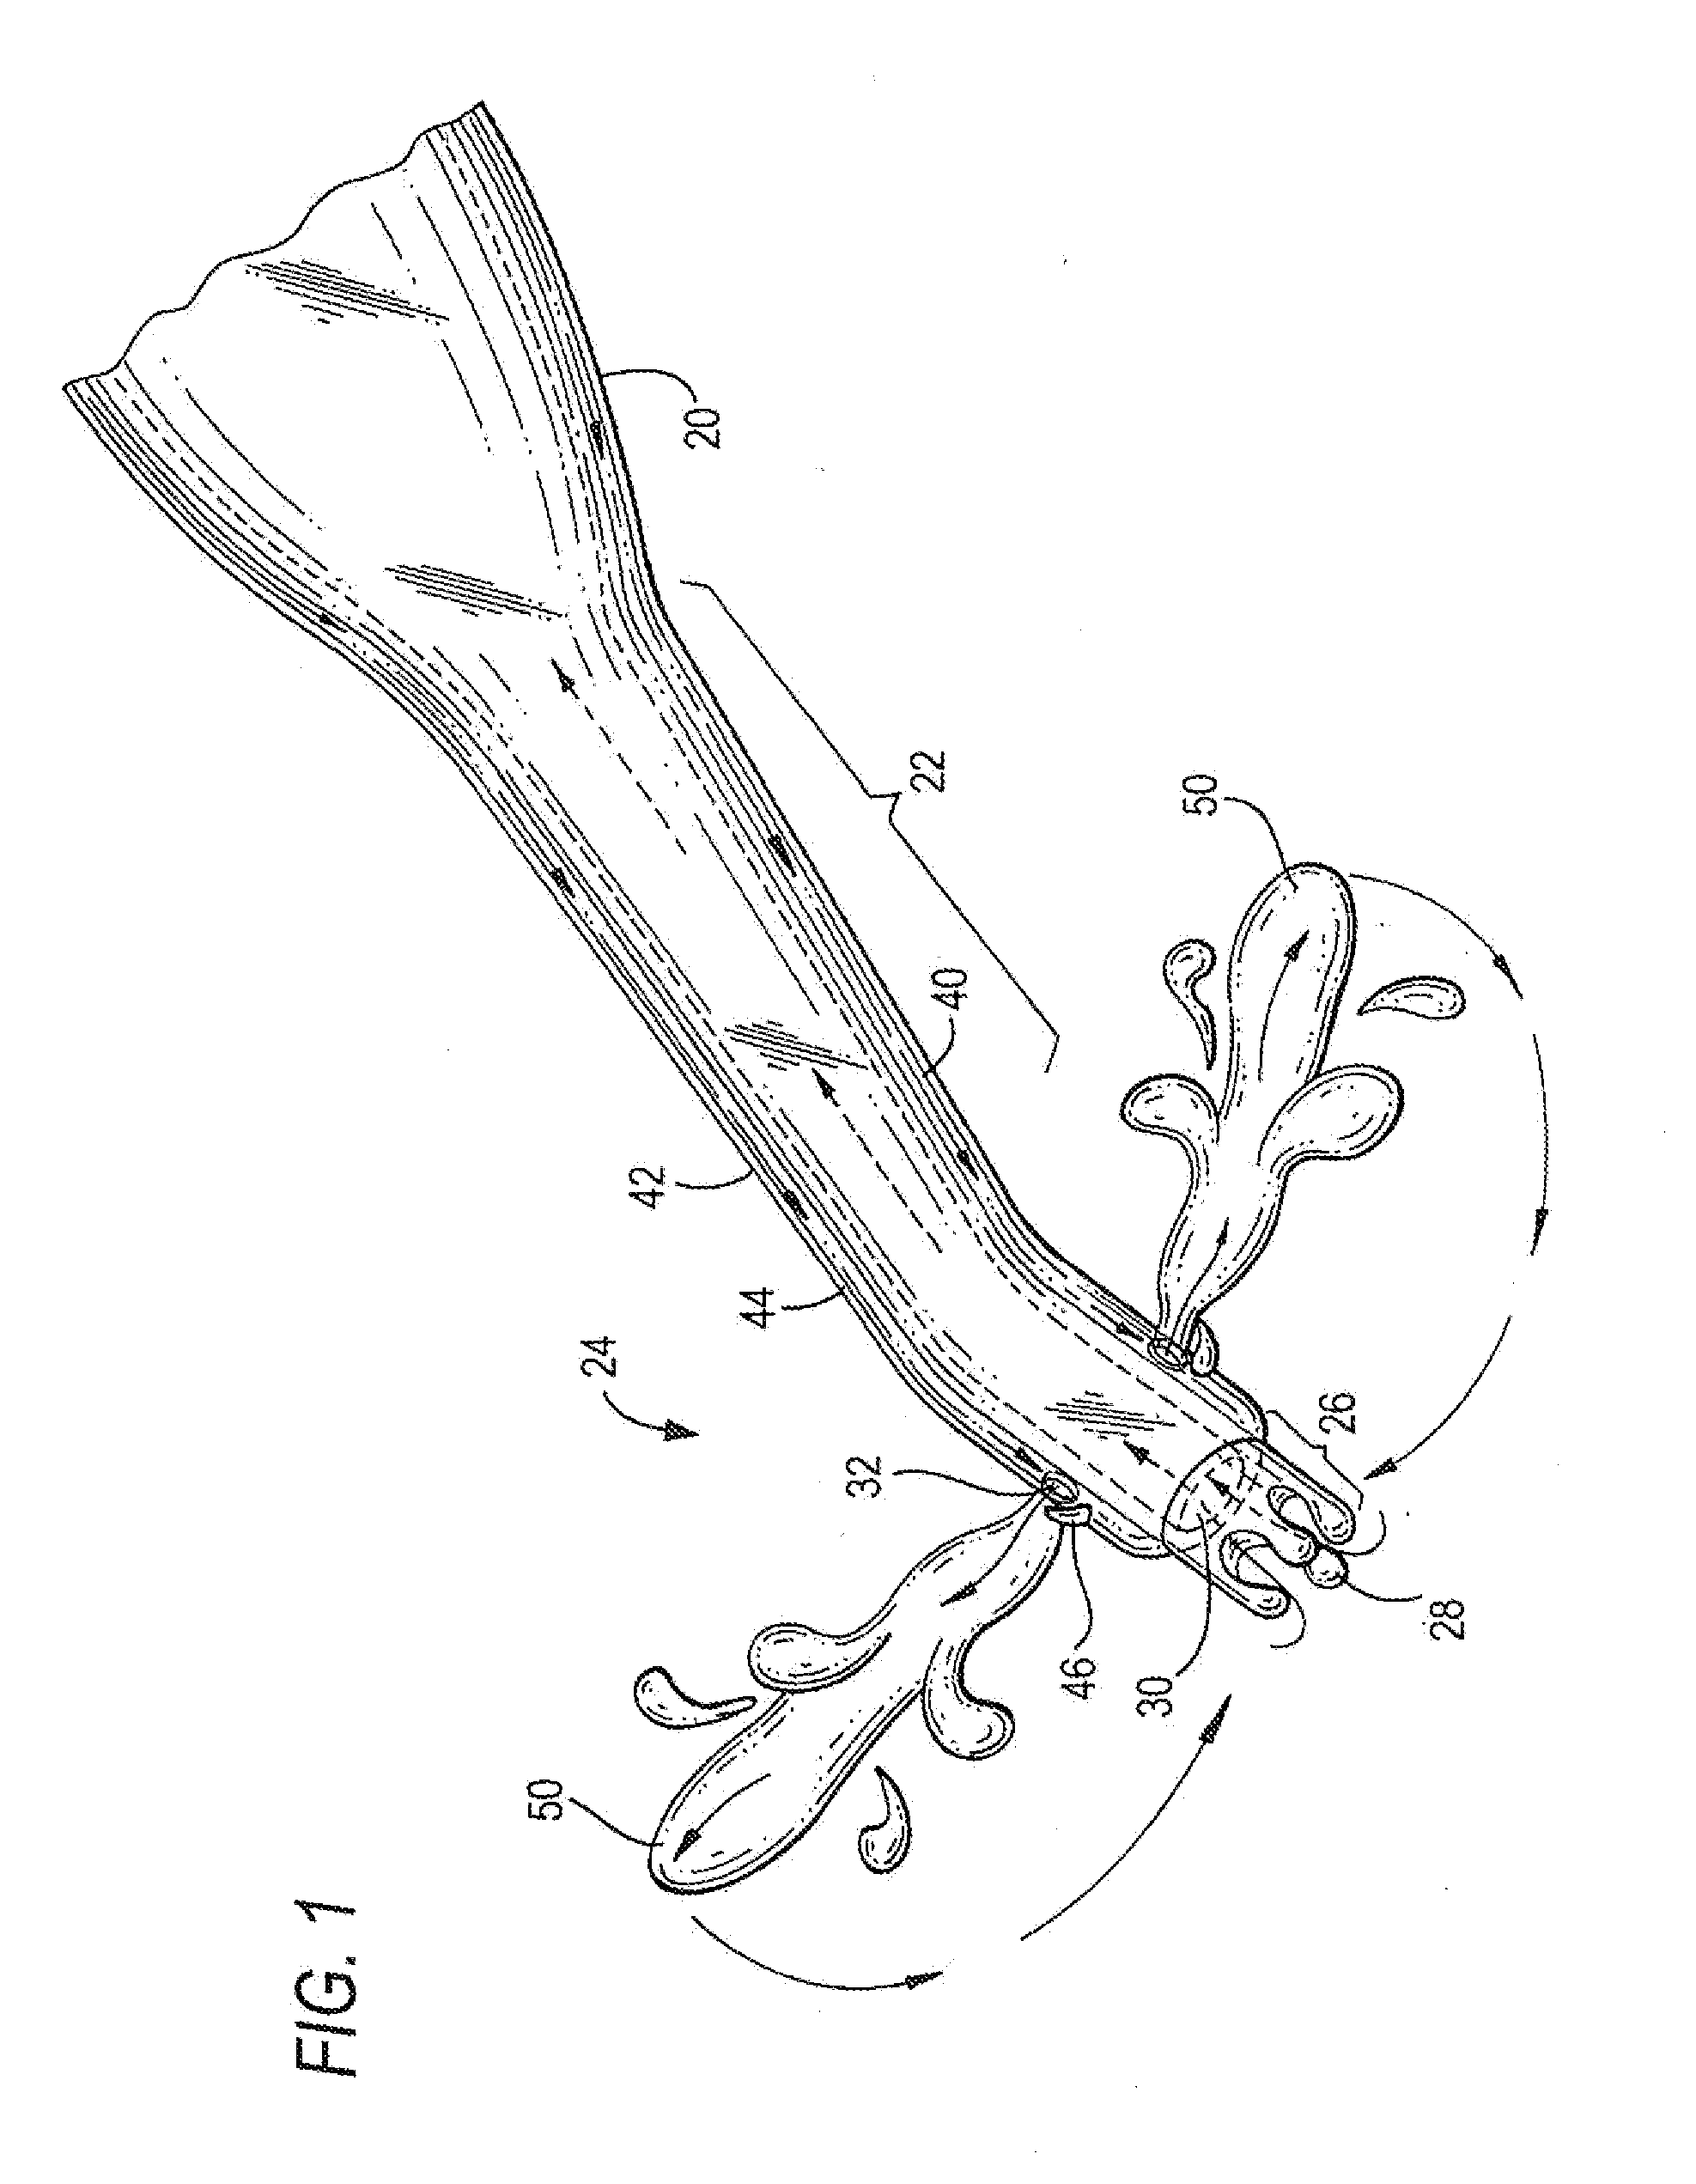 Apparatus and method for performing phacoemulsification